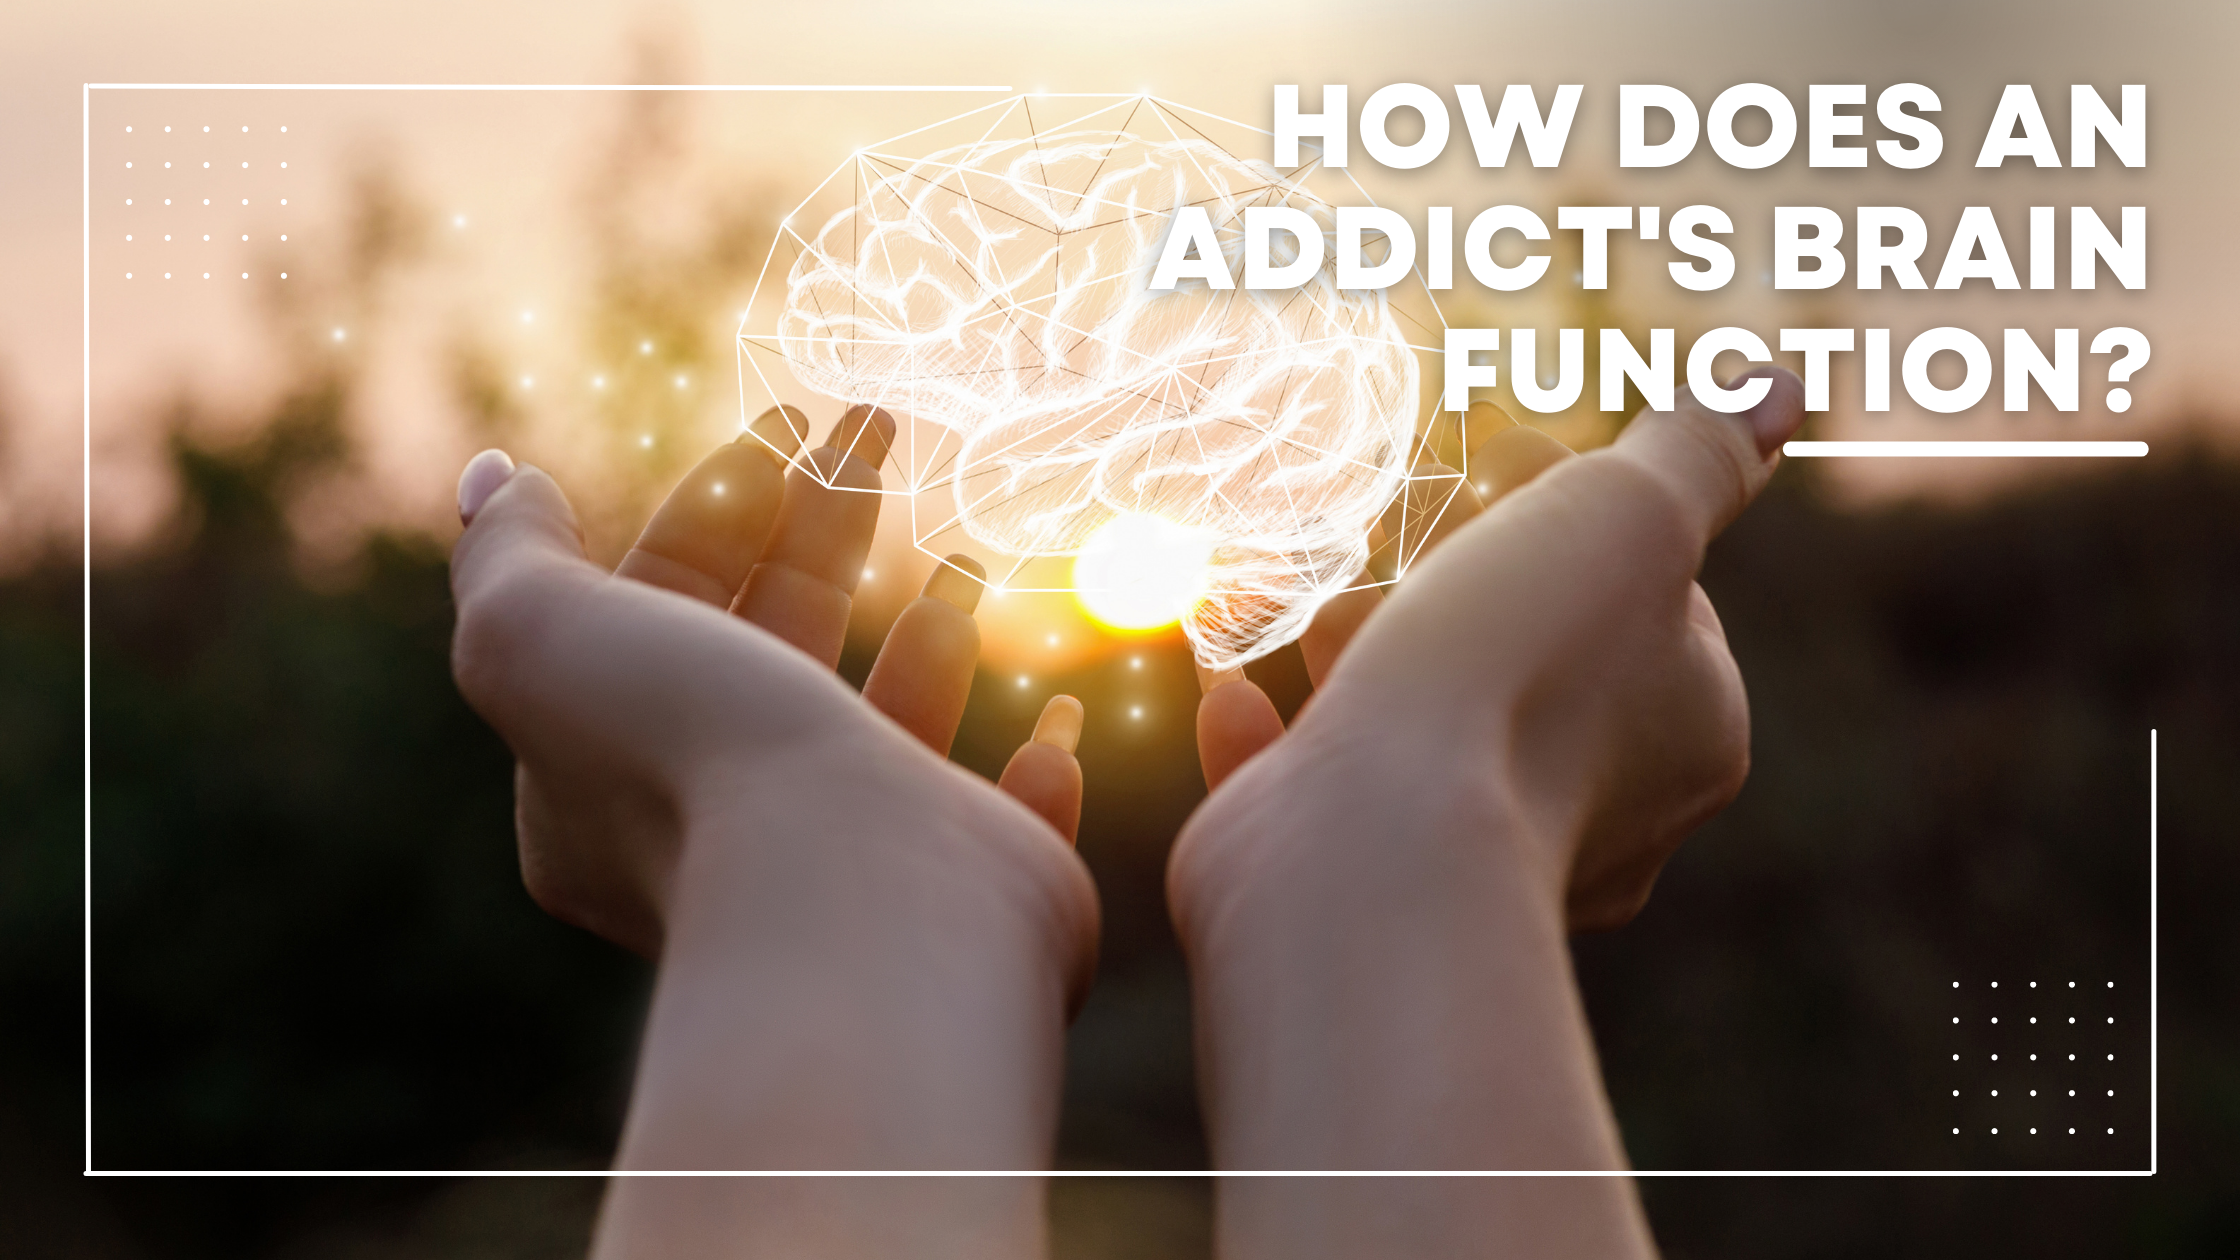 How Does an Addict’s Brain Function?